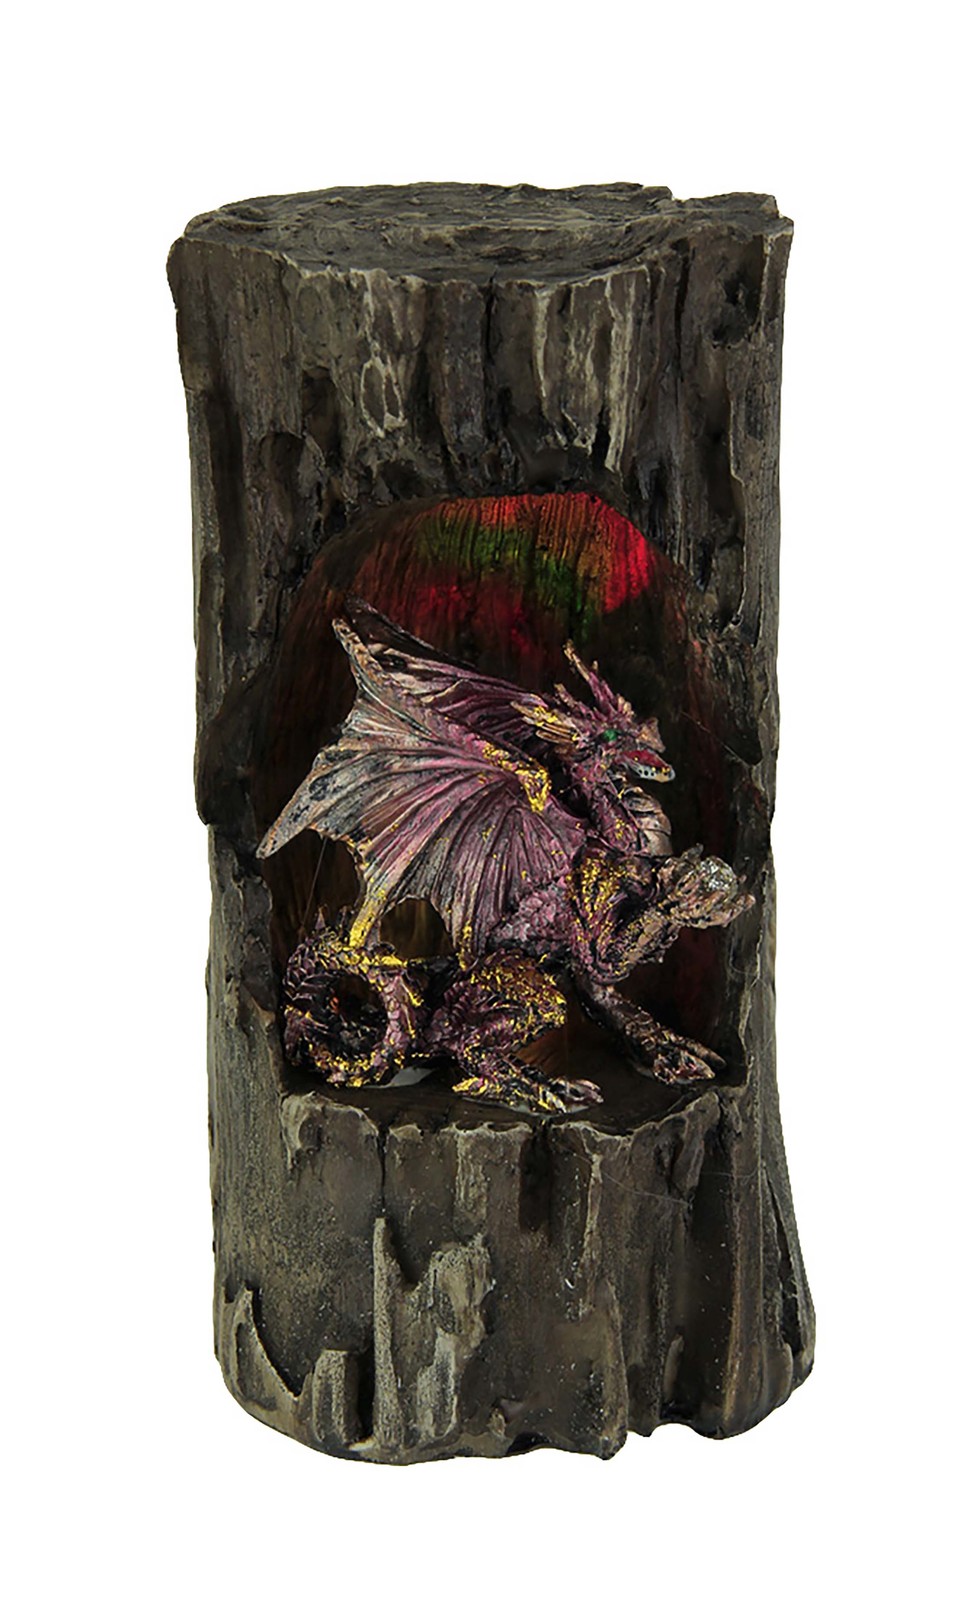 Primary image for Zeckos Dragon Holding Orb In Old Log Statue with Color Changing LED Lights